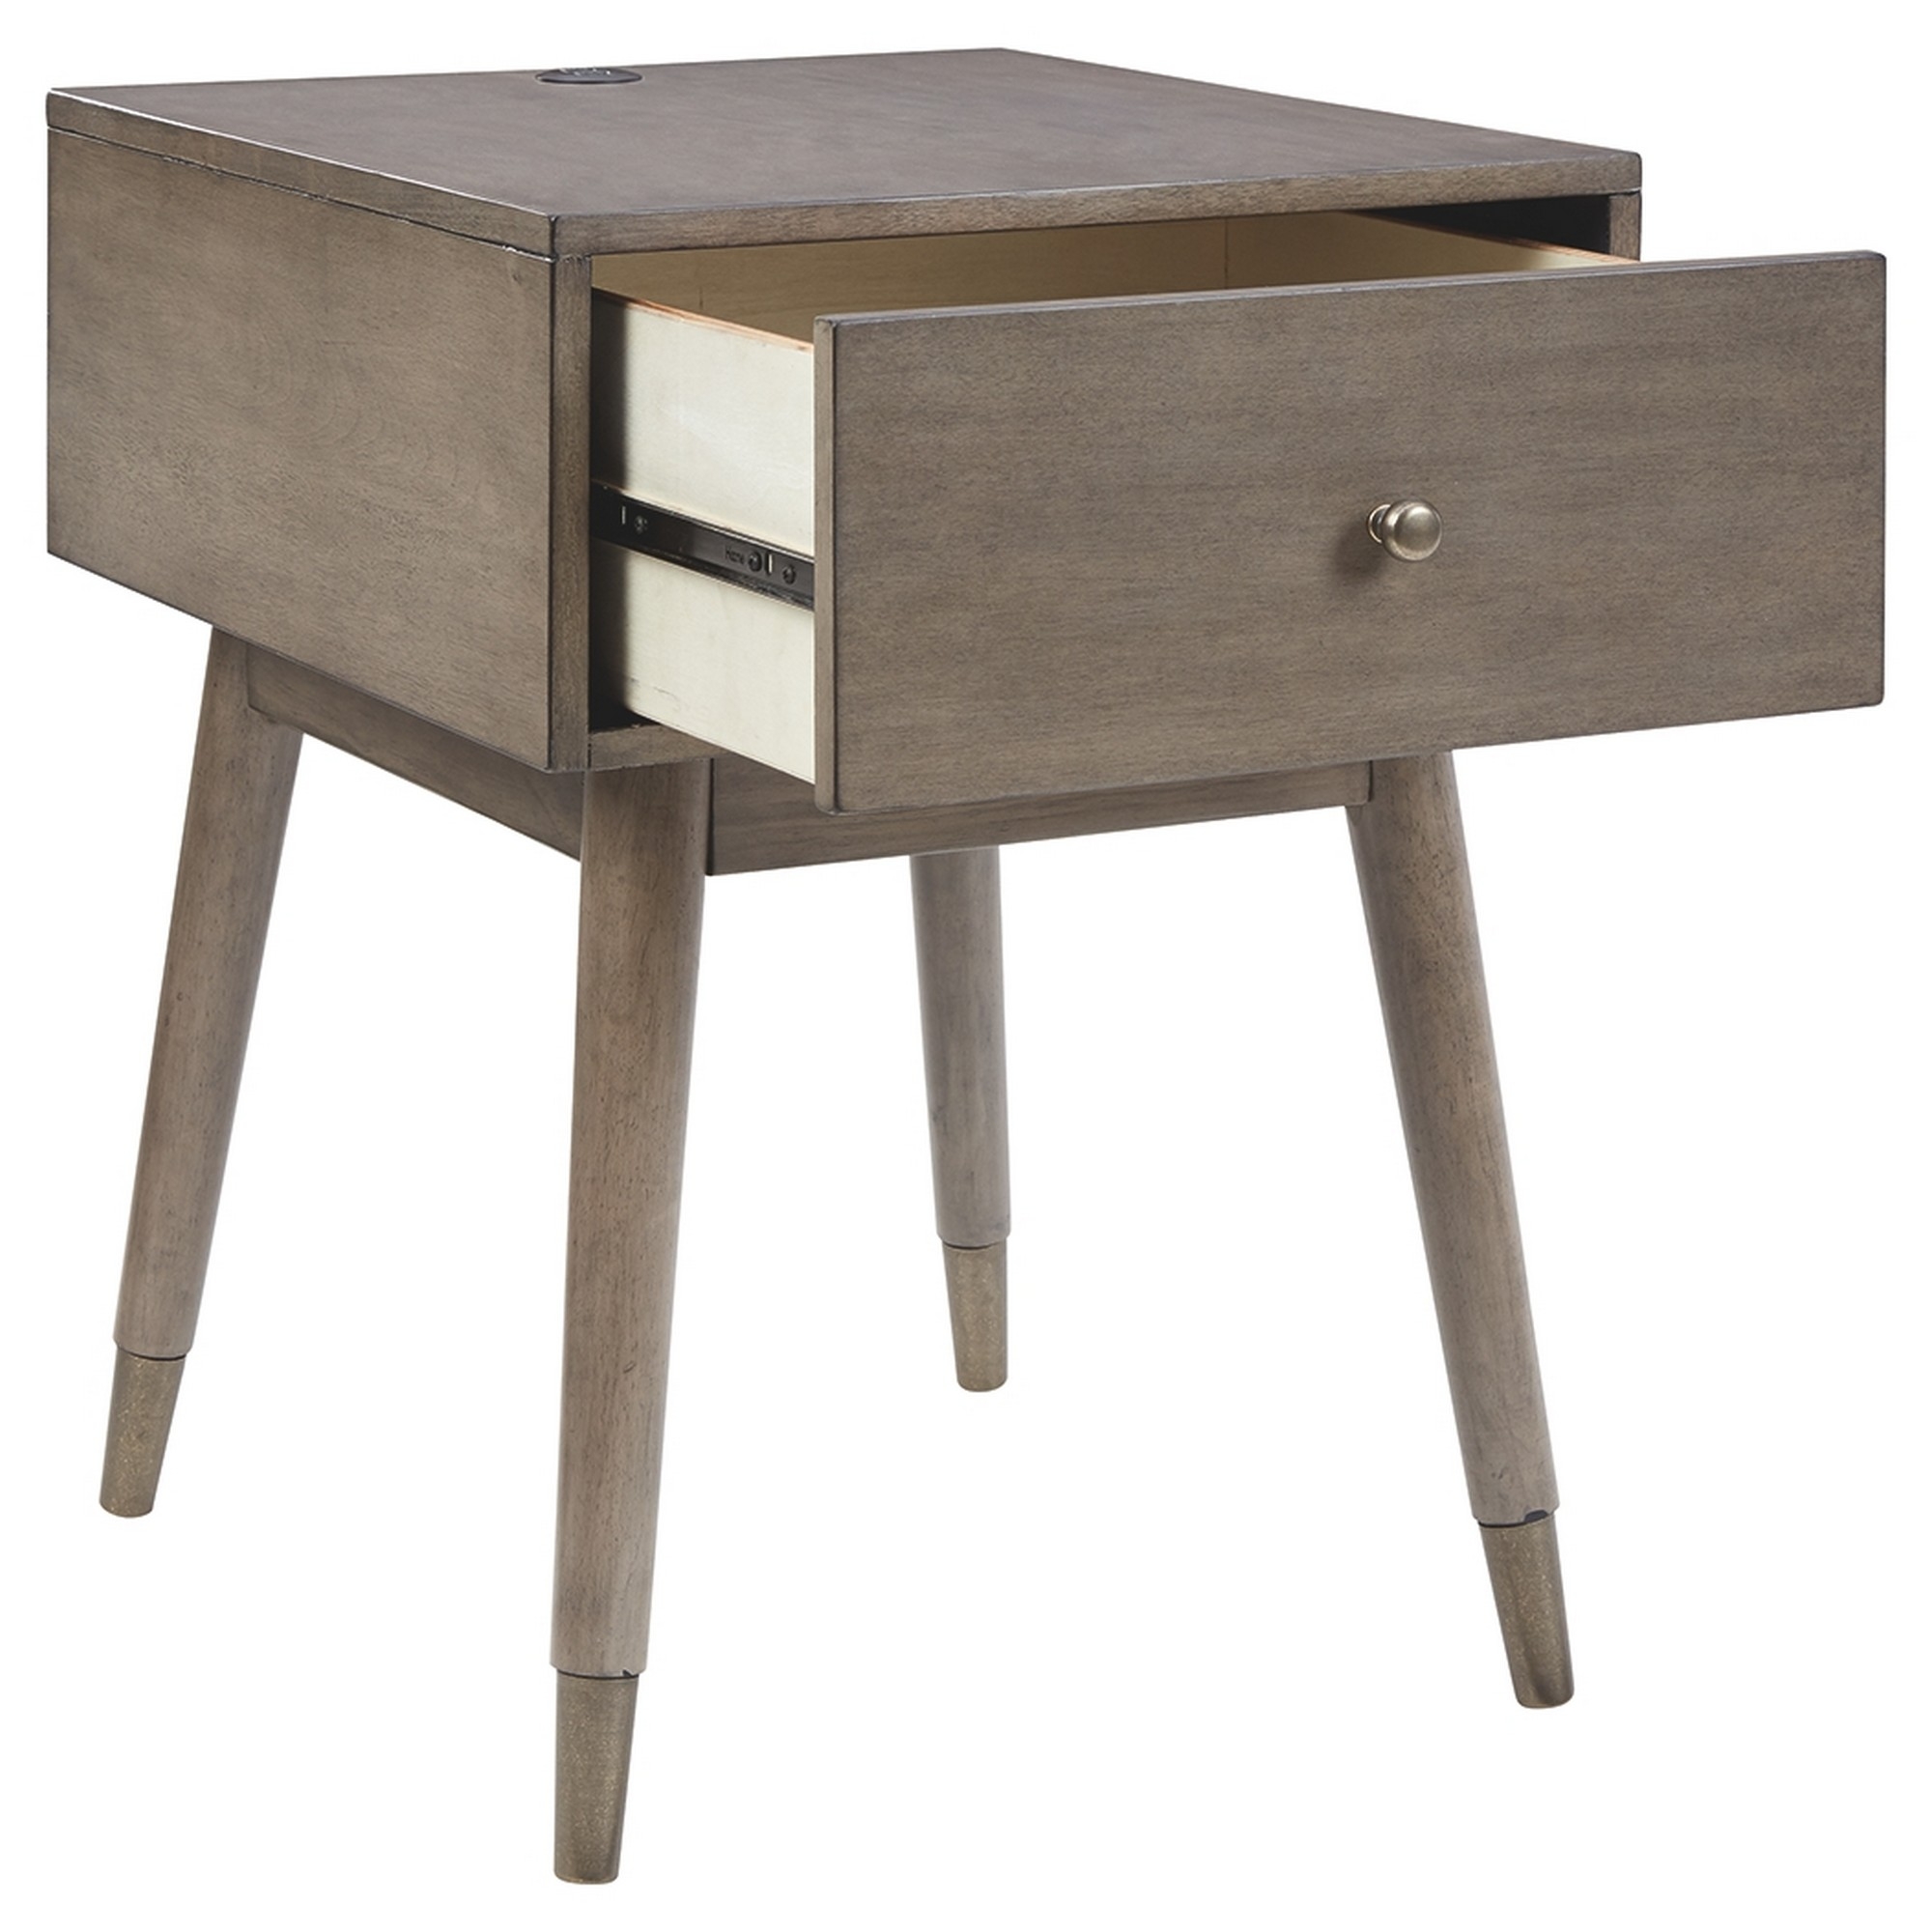 1 Drawer Wooden Accent Table With USB Ports And Splayed Legs, Taupe Gray- Saltoro Sherpi